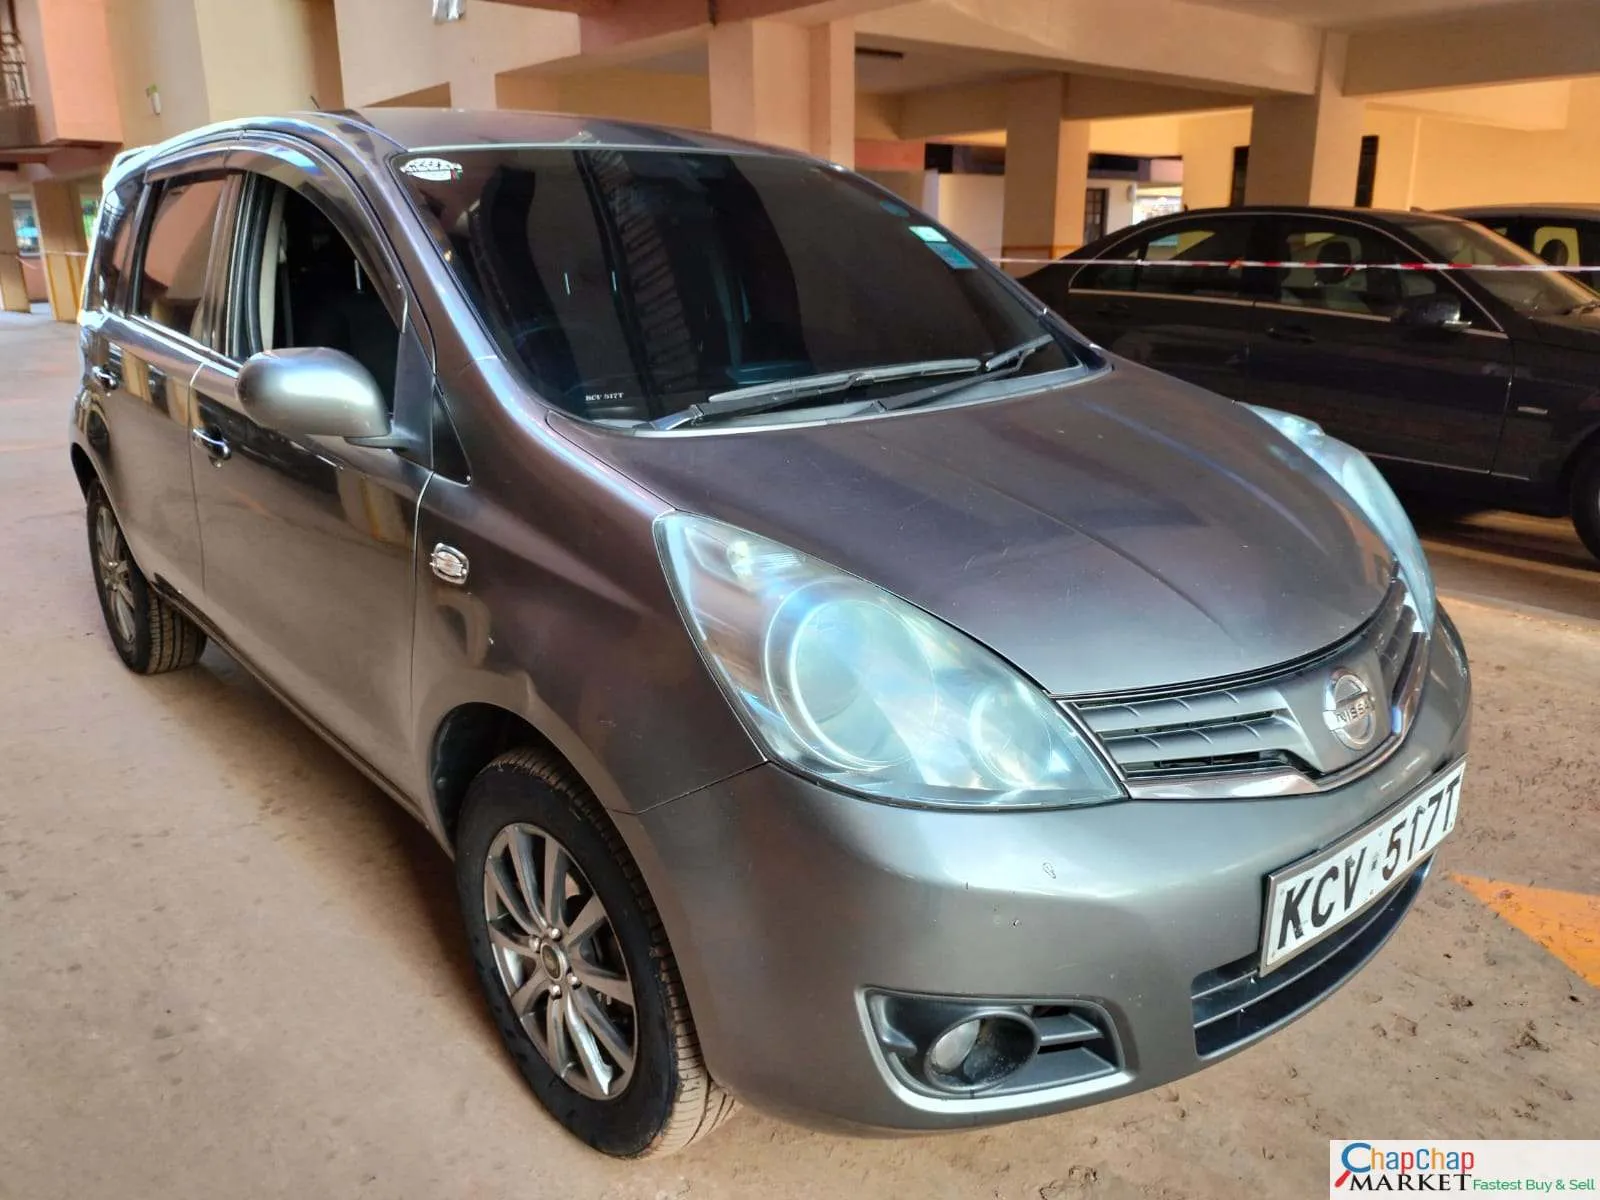 Cars Cars For Sale/Vehicles-Nissan Note QUICK SALE You ONLY Pay 30% Deposit Trade in Ok Wow! 9